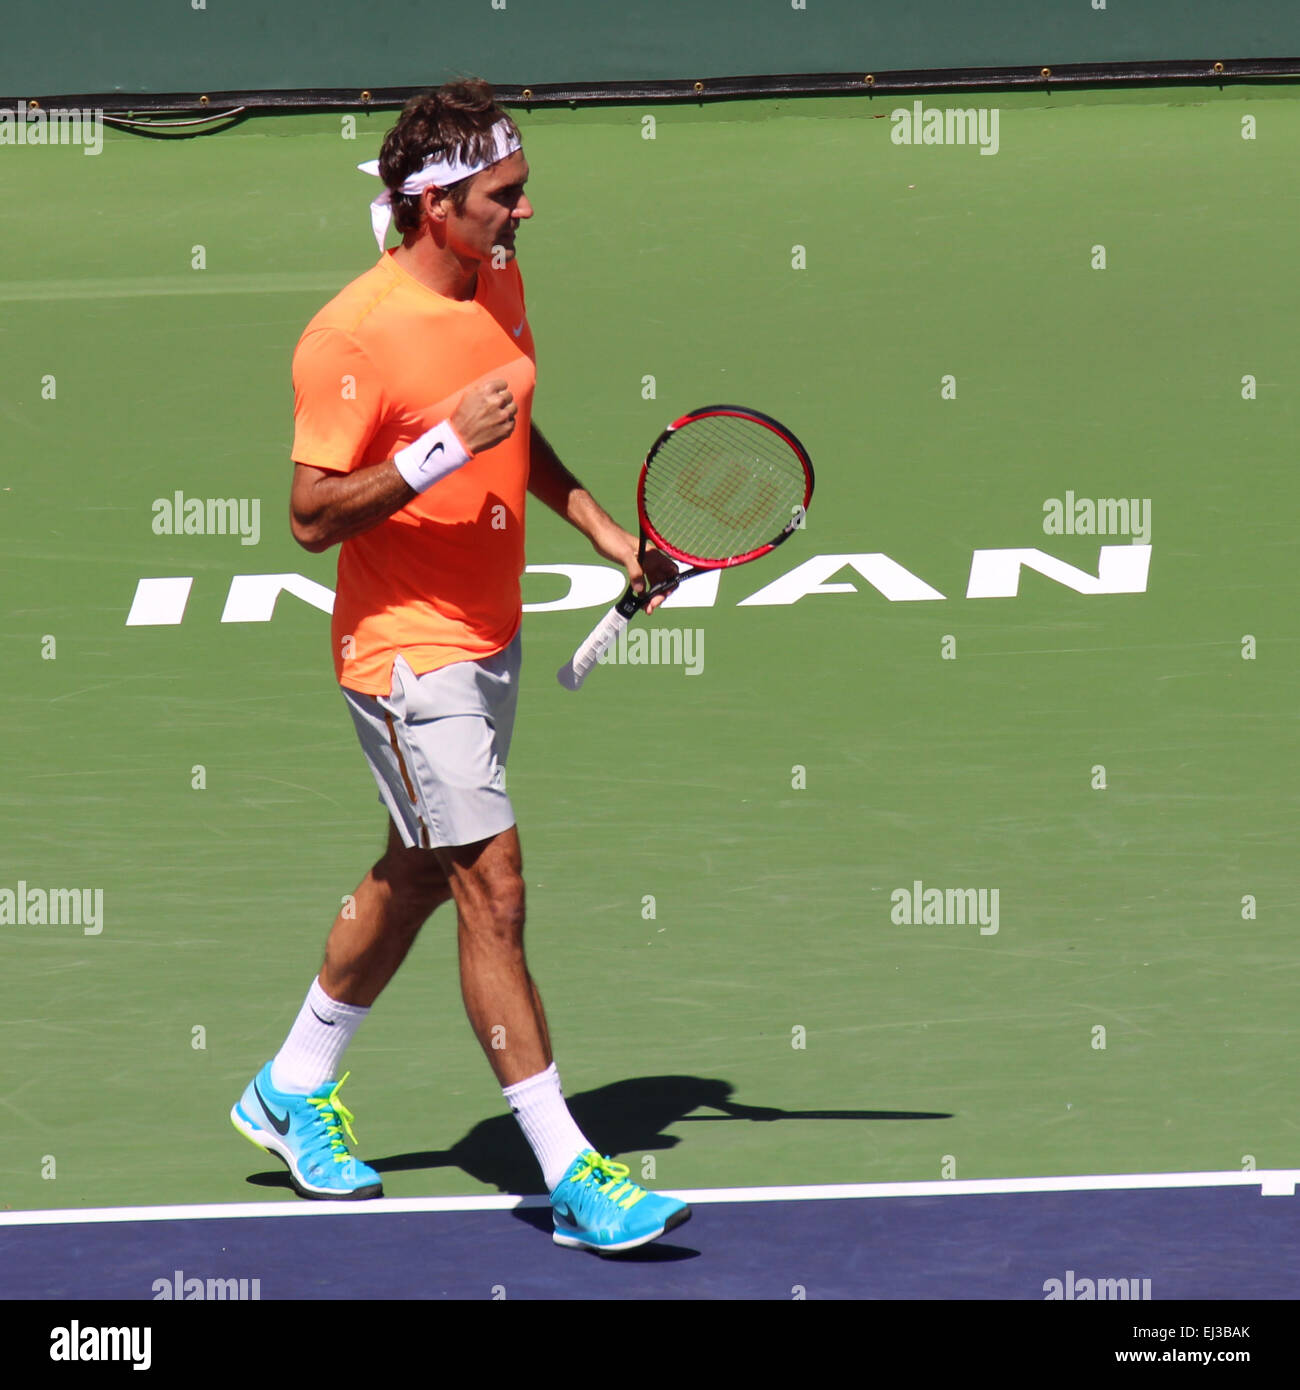 Indian Wells, California 20th March, 2015 Tennis player Roger Federer defeats Tomas Berdych in the Quarterfinal of the Men's Singles at the BNP Paribas Open (score 6-4 6-0). Photo: Roger Federer Credit: Werner Fotos/Alamy Live News Stock Photo